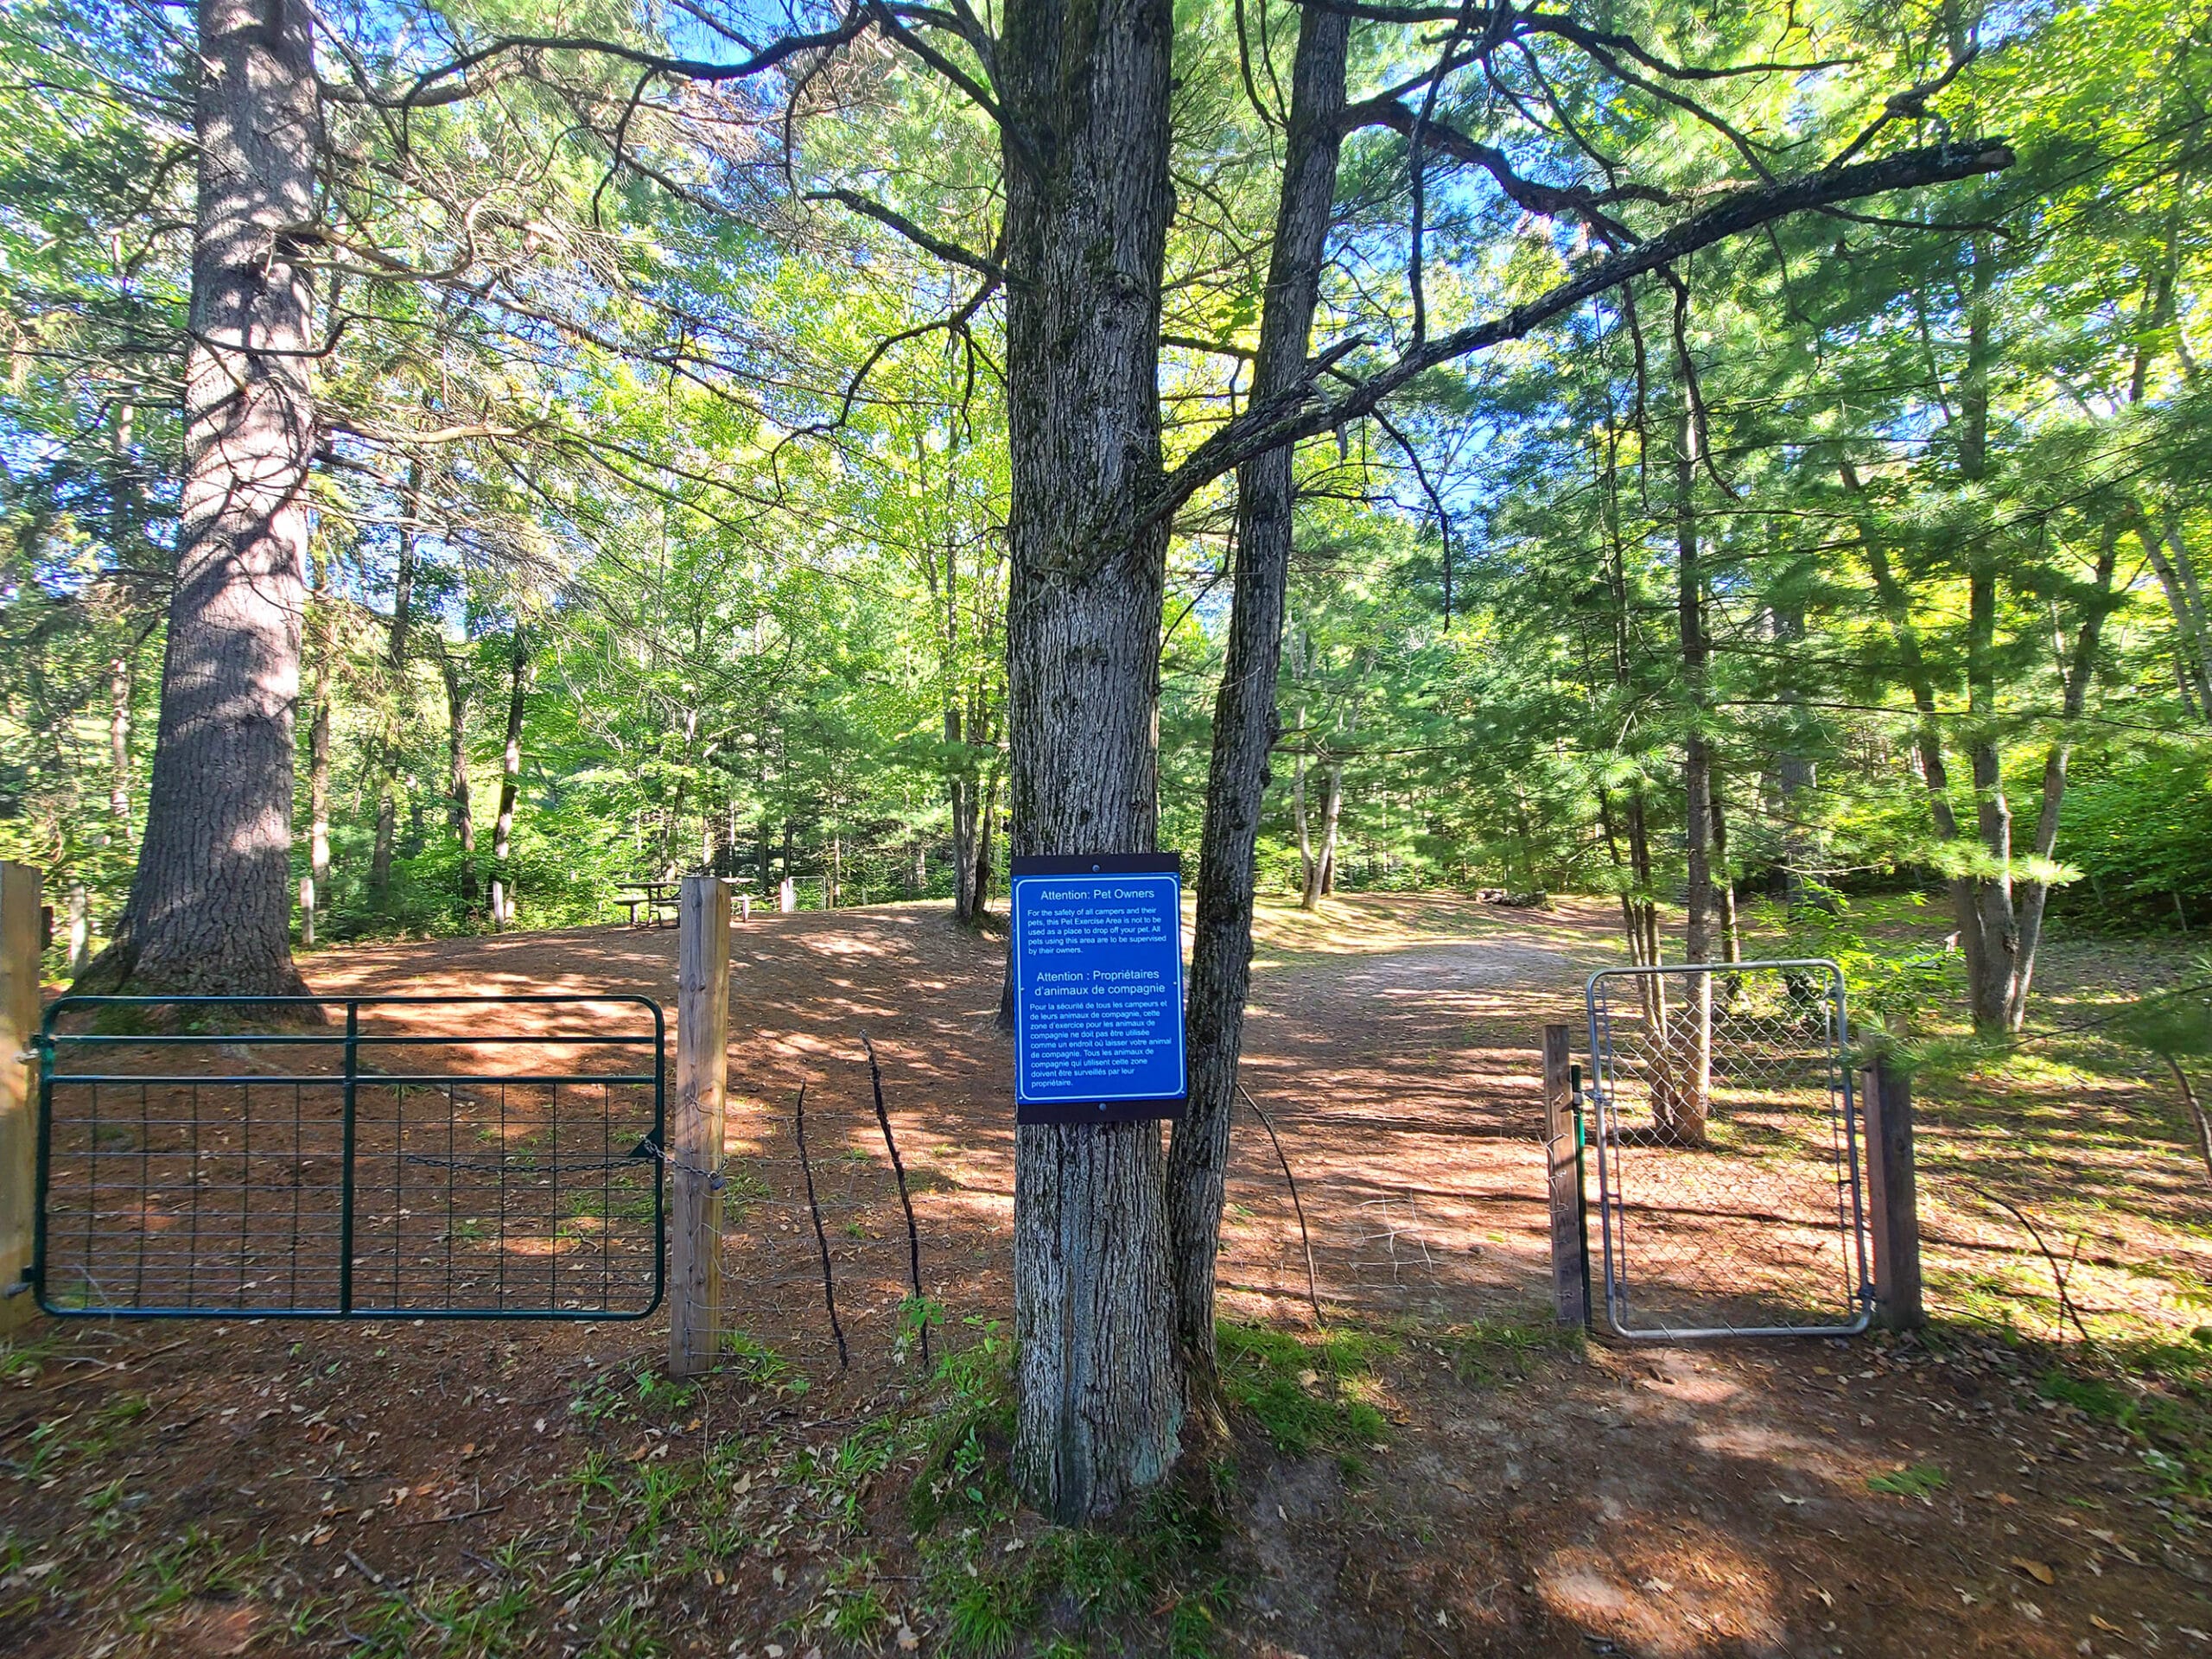 A large fenced in area surrounded by trees.